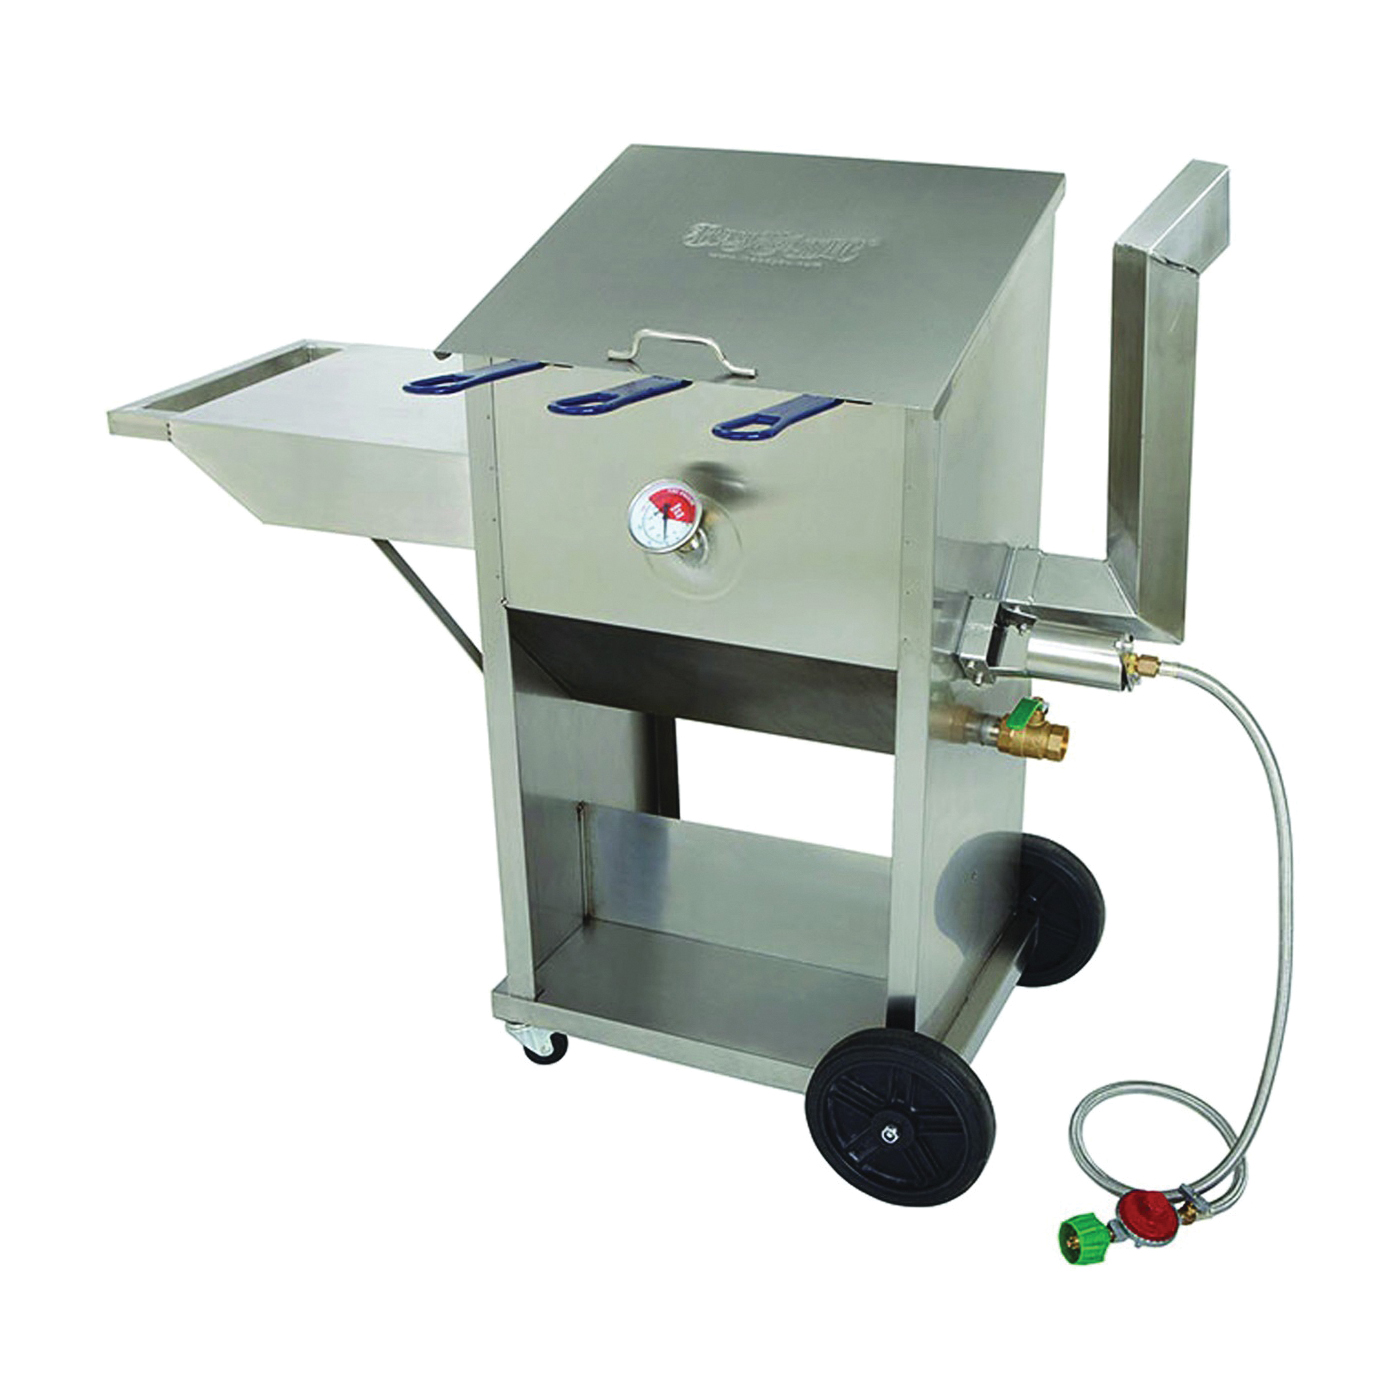 700-709 Fryer, 9 gal Capacity, Cool Touch Control